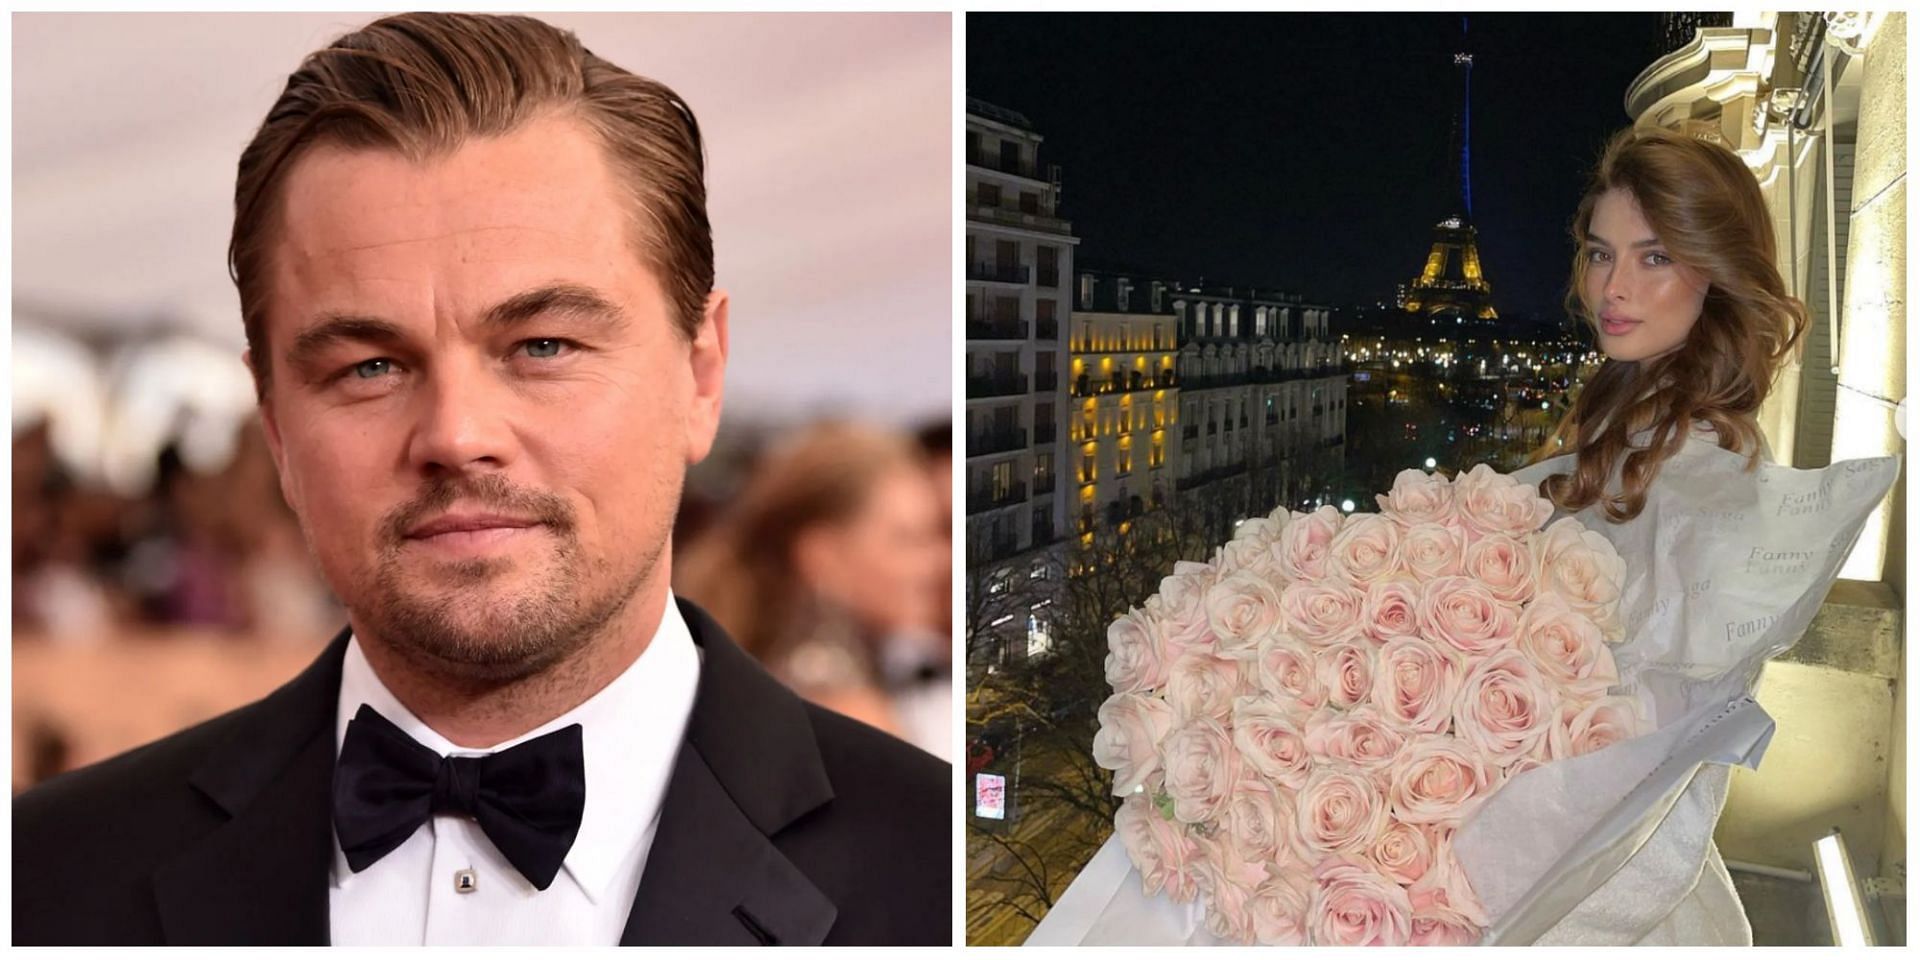 Social media users speculate that Leonardo DiCaprio is dating the 19 year old model, Eden Polani. (Image via Getty Images &amp; Instagram)